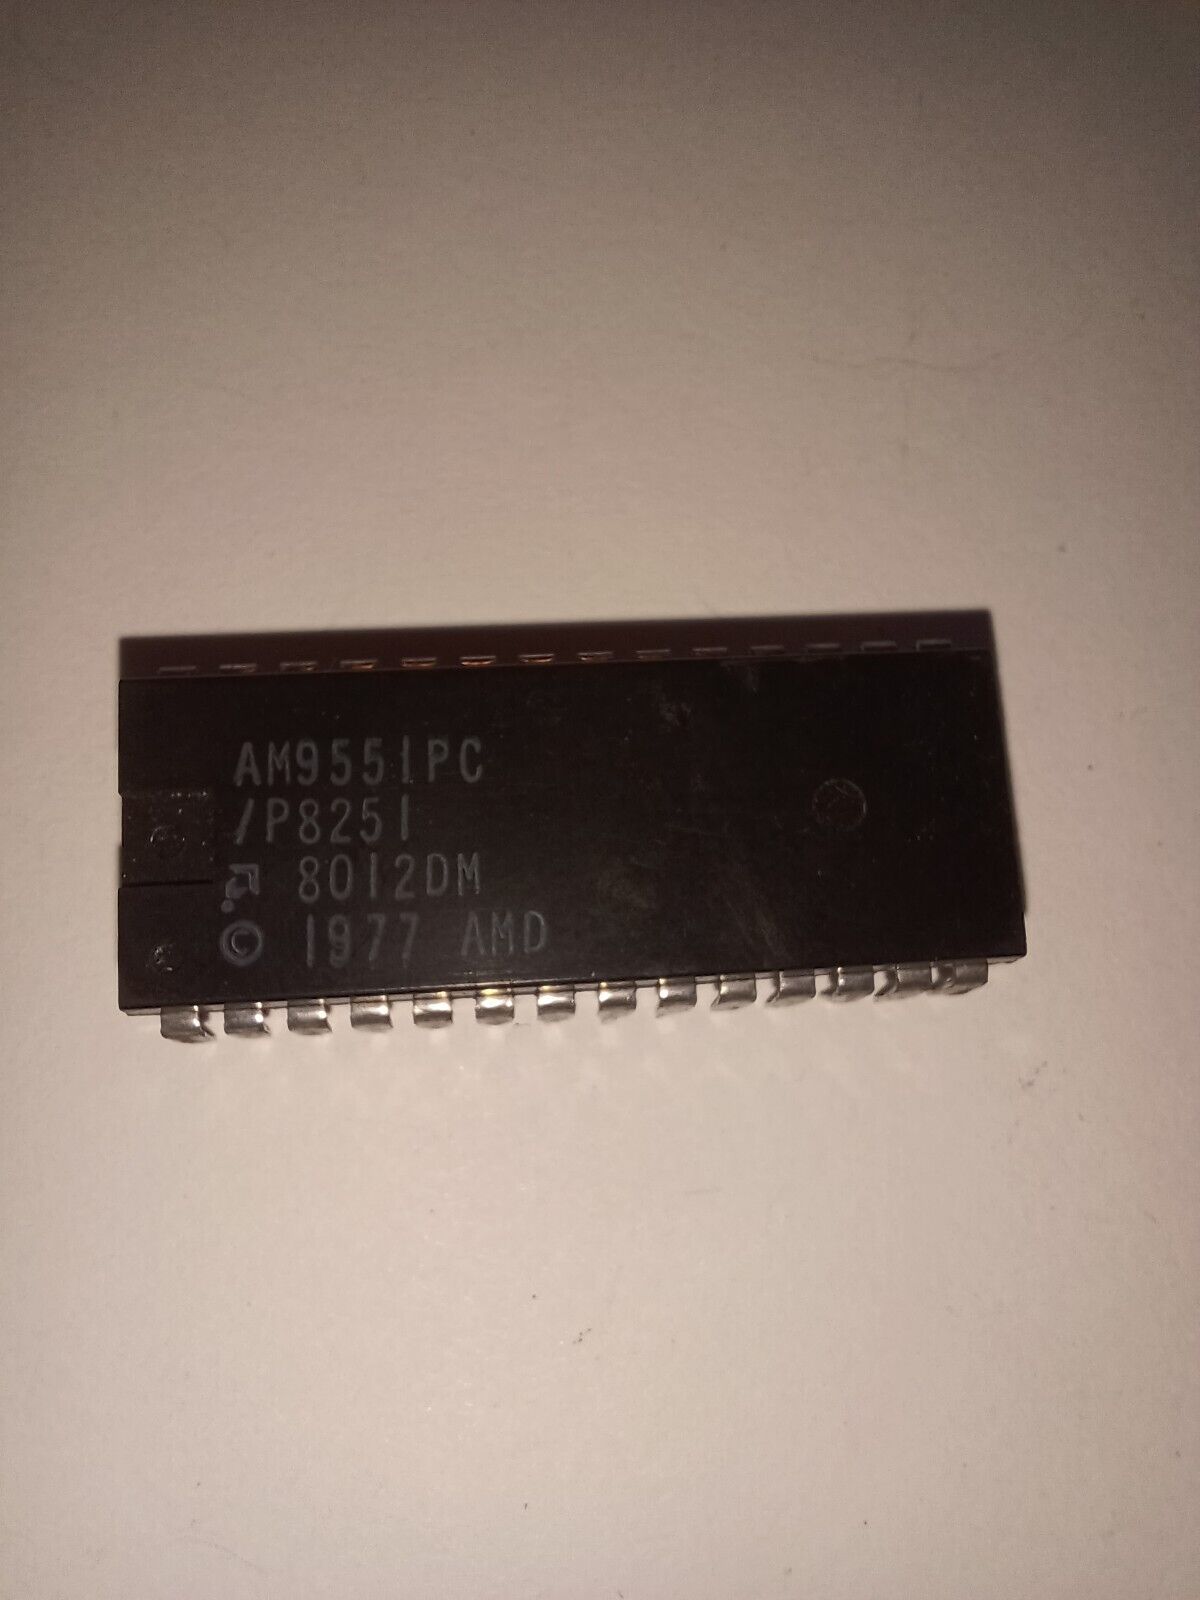 AMD AM9551PC / IC / AMD / DIP / 1 PIECE P8251 VINTAGE 1977 and 1979